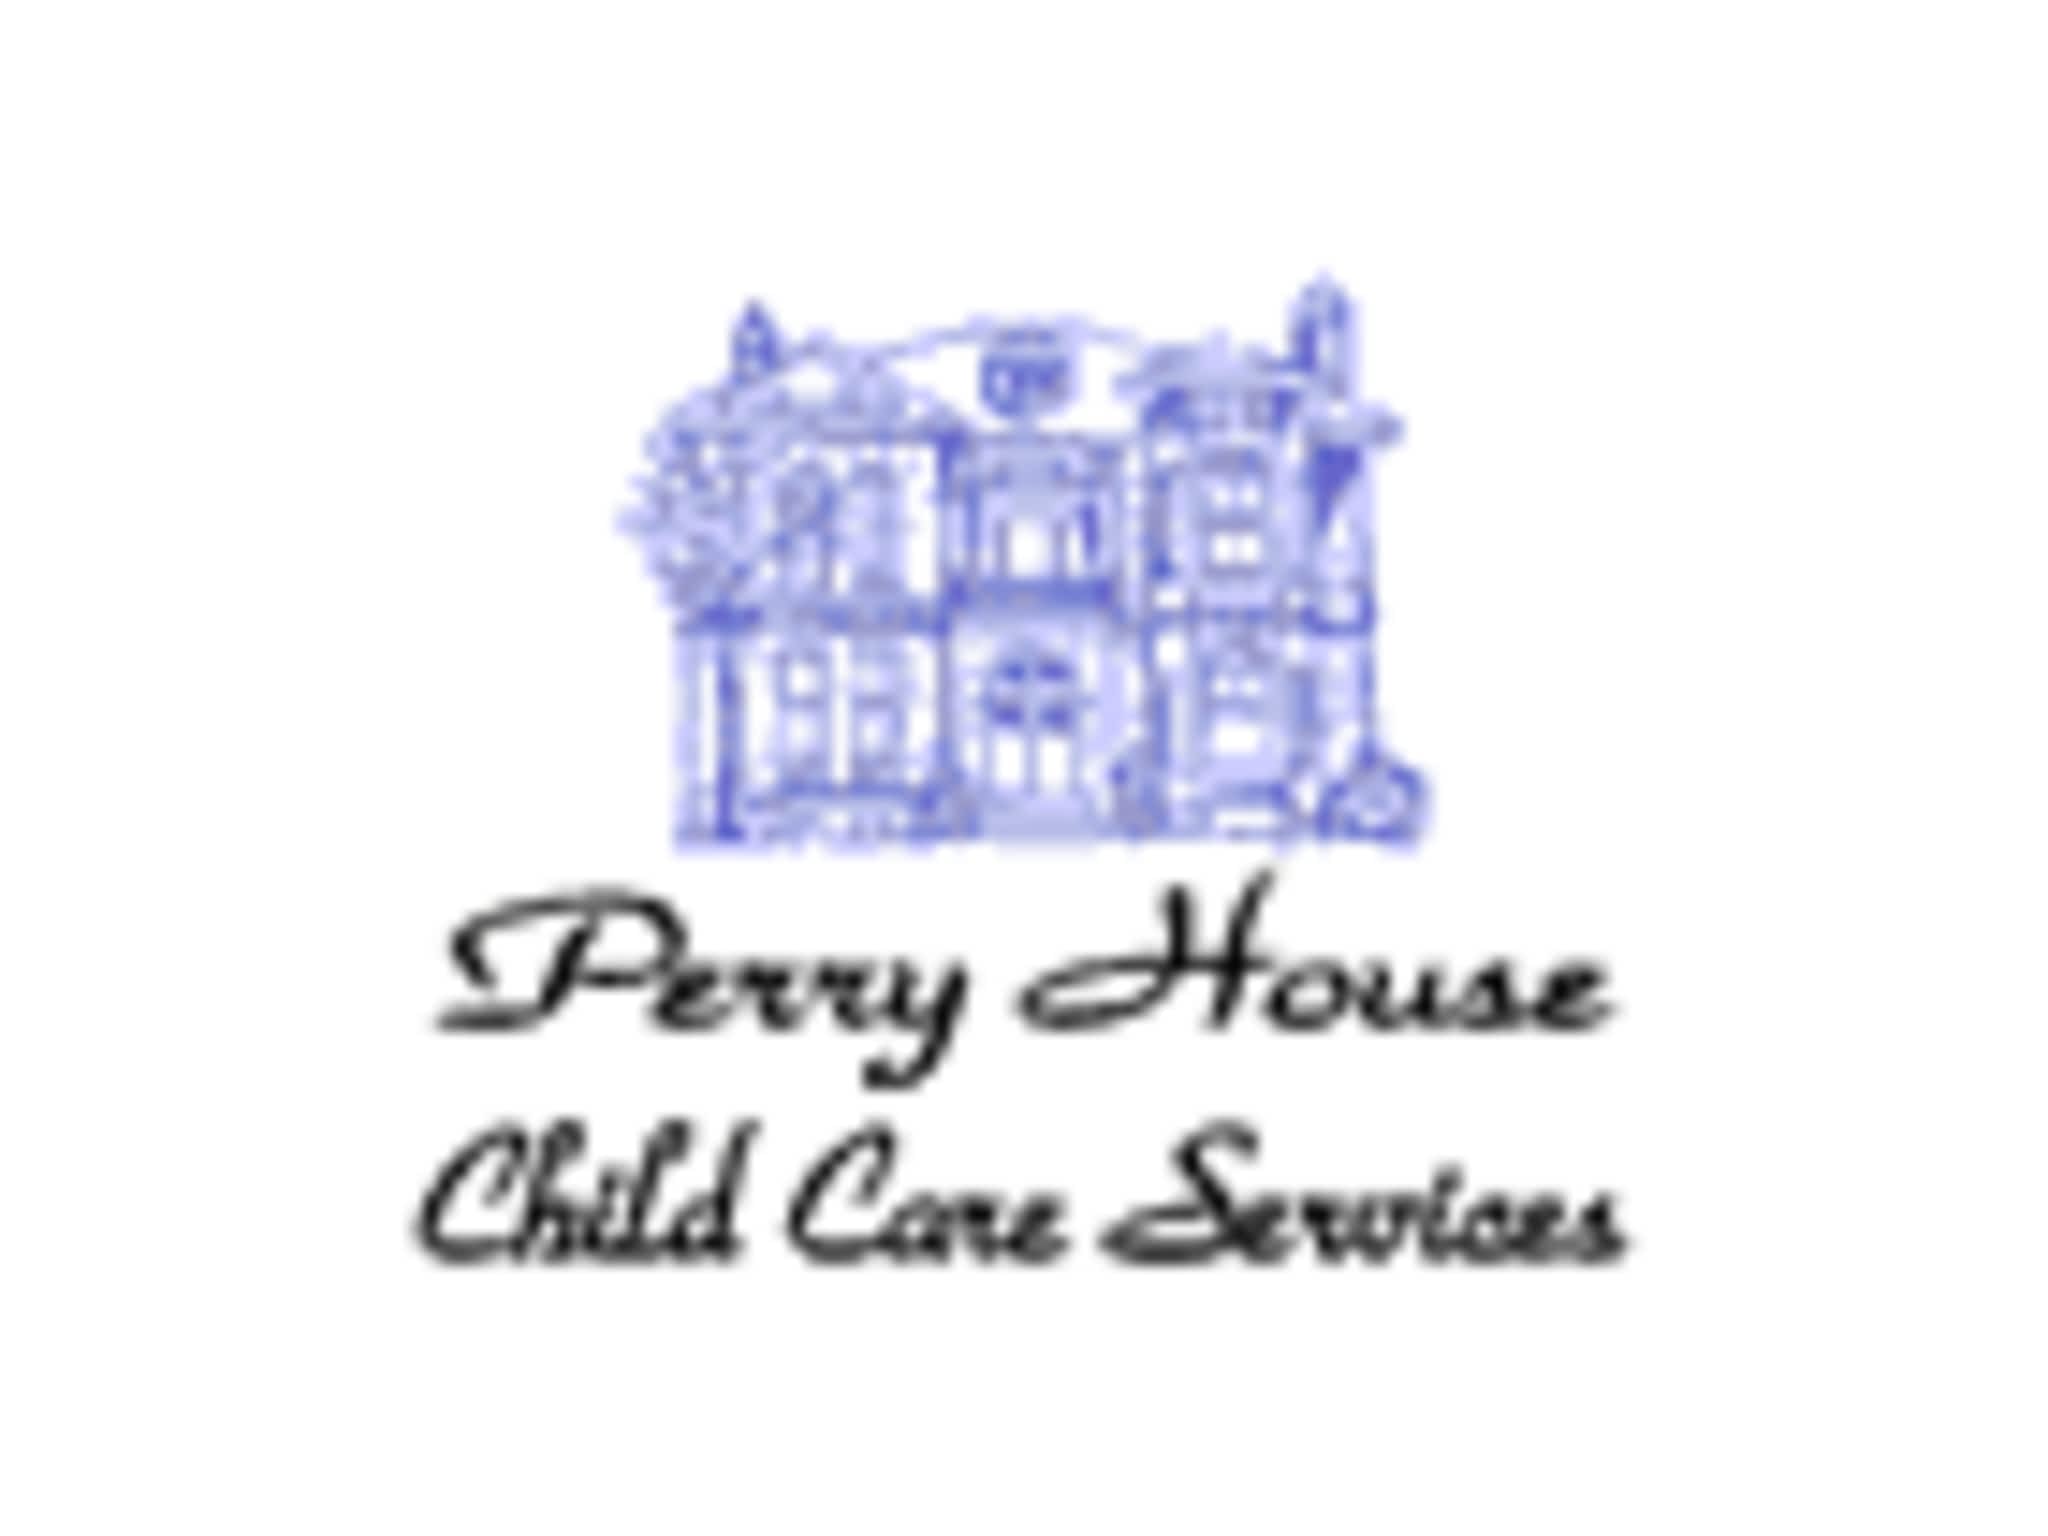 photo Perry House Childcare Services